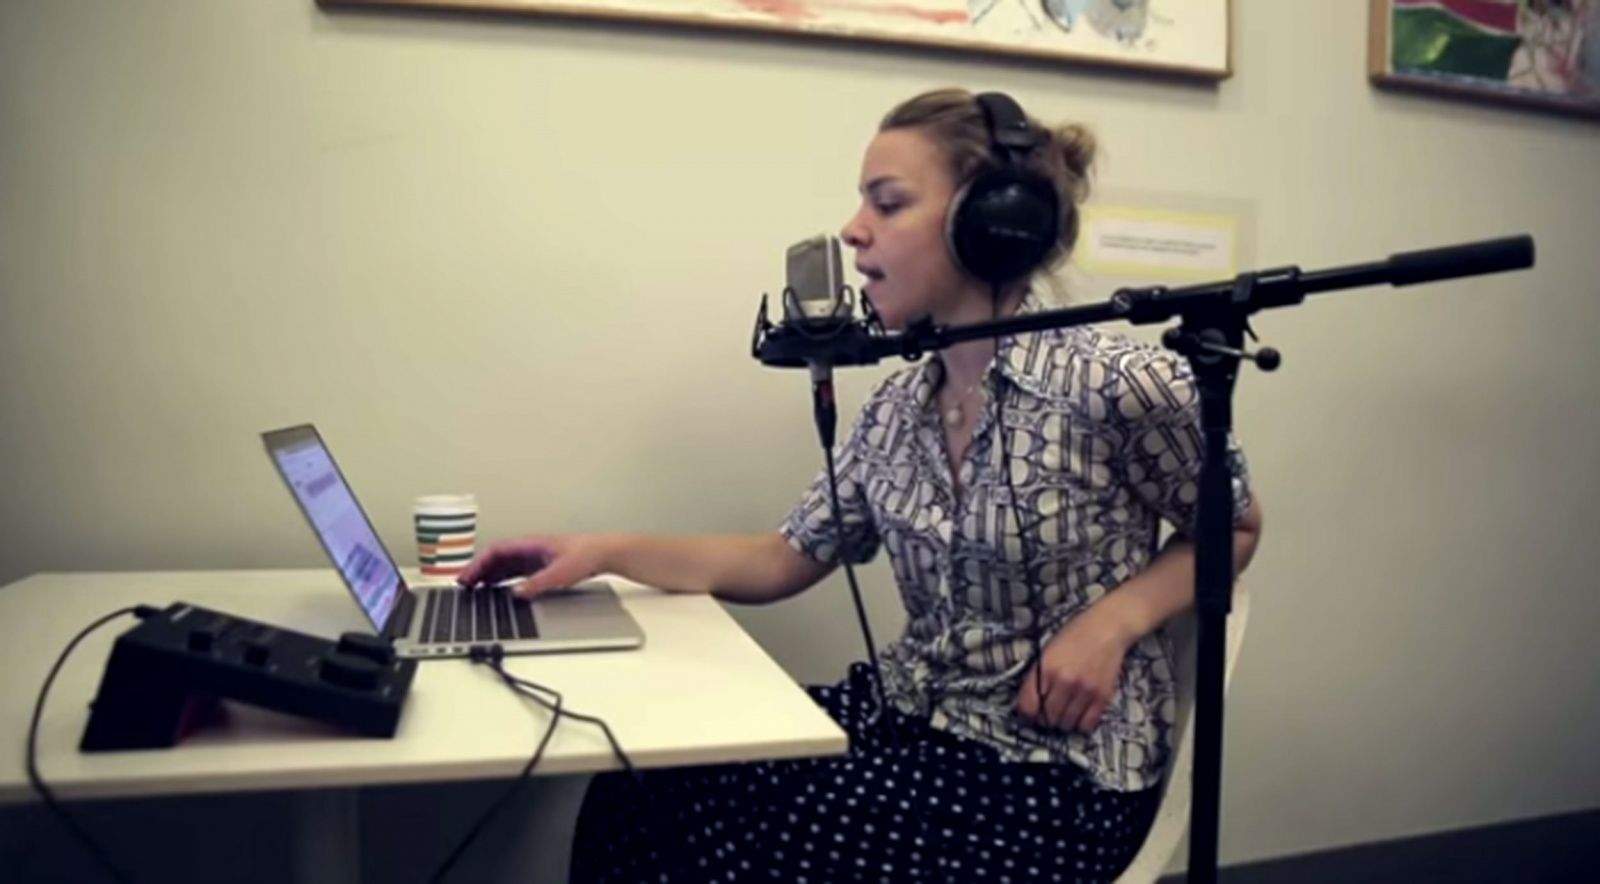 A singer records vocals using Sountrap recording software, which can be used on any device.